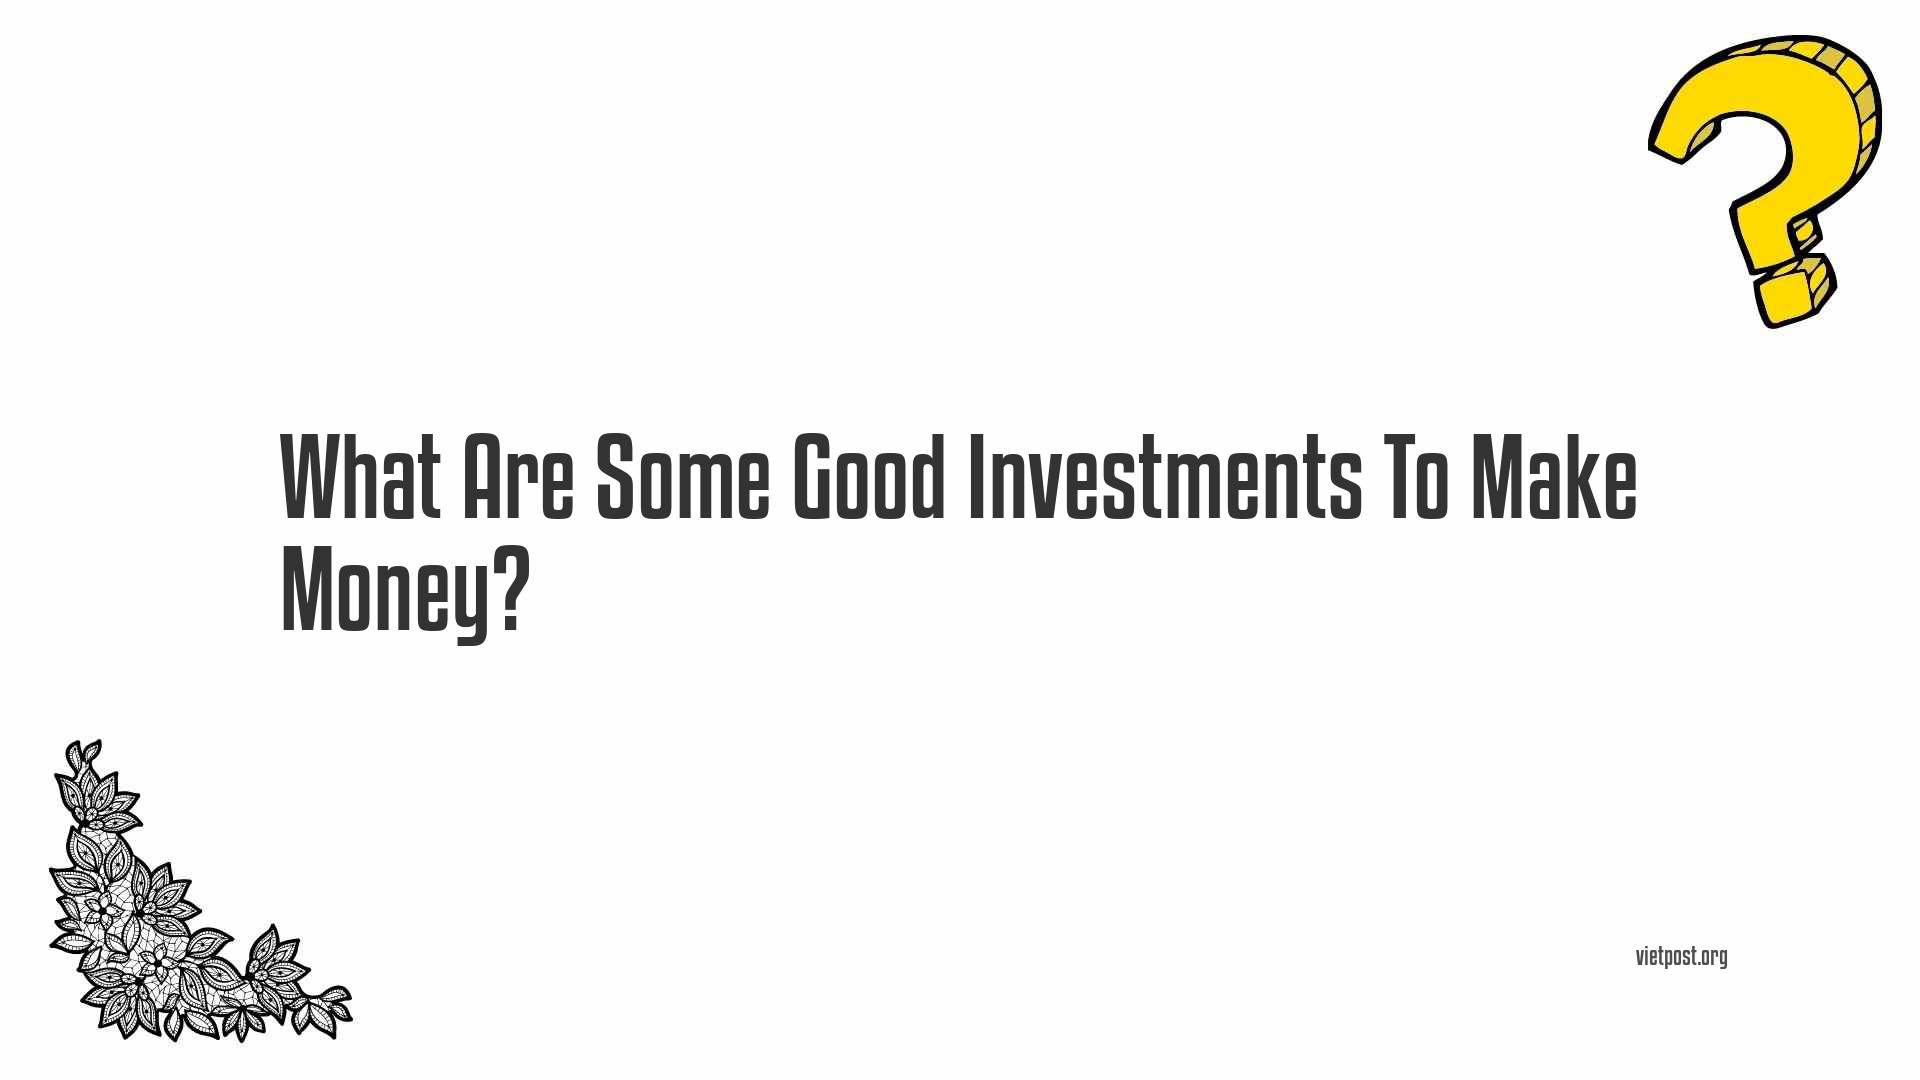 What Are Some Good Investments To Make Money?